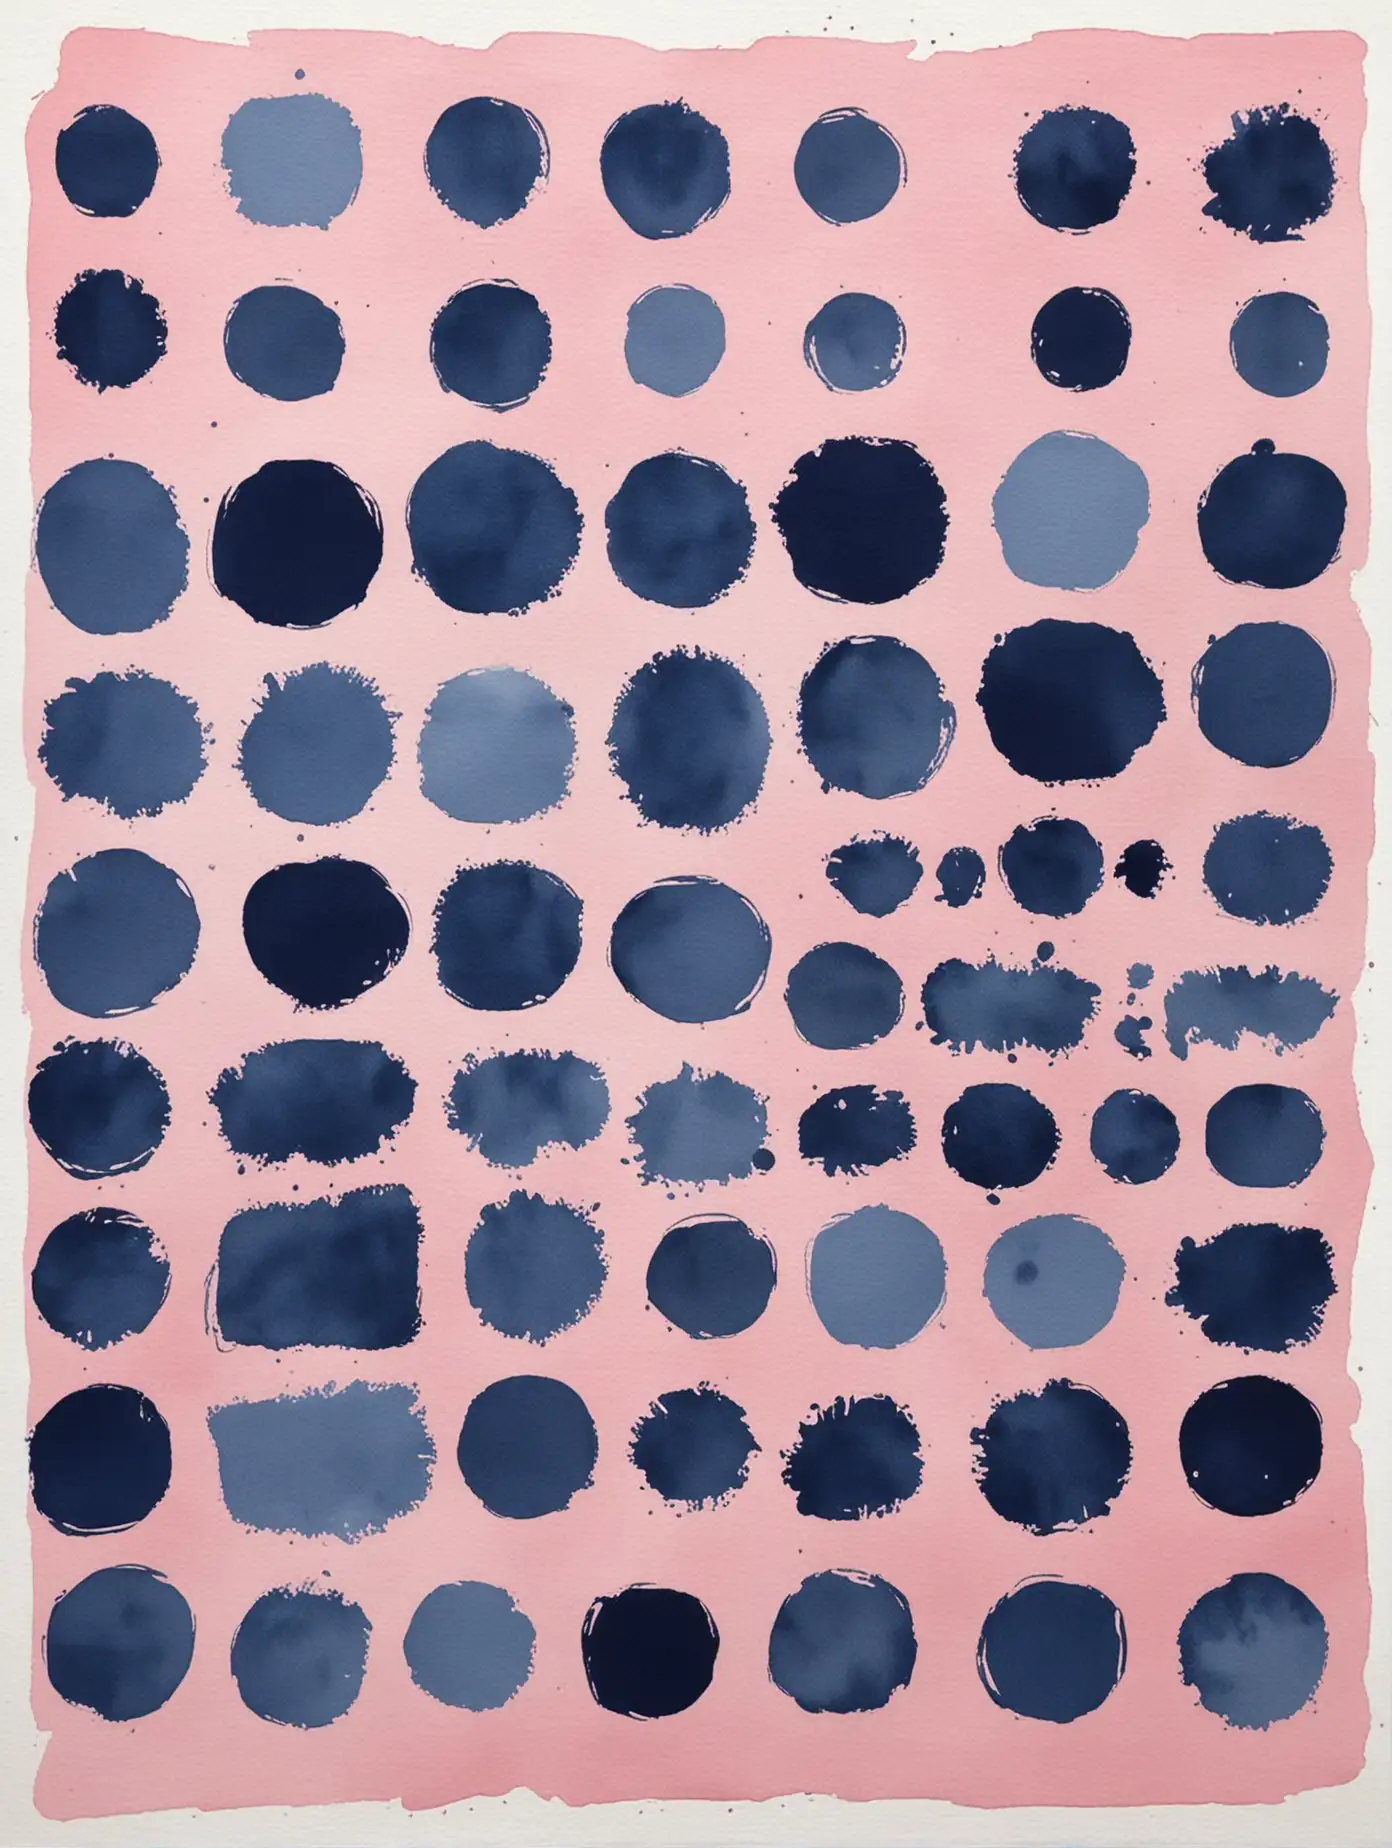 watercolour navy blue and light pink dot art with thick paint strokes

